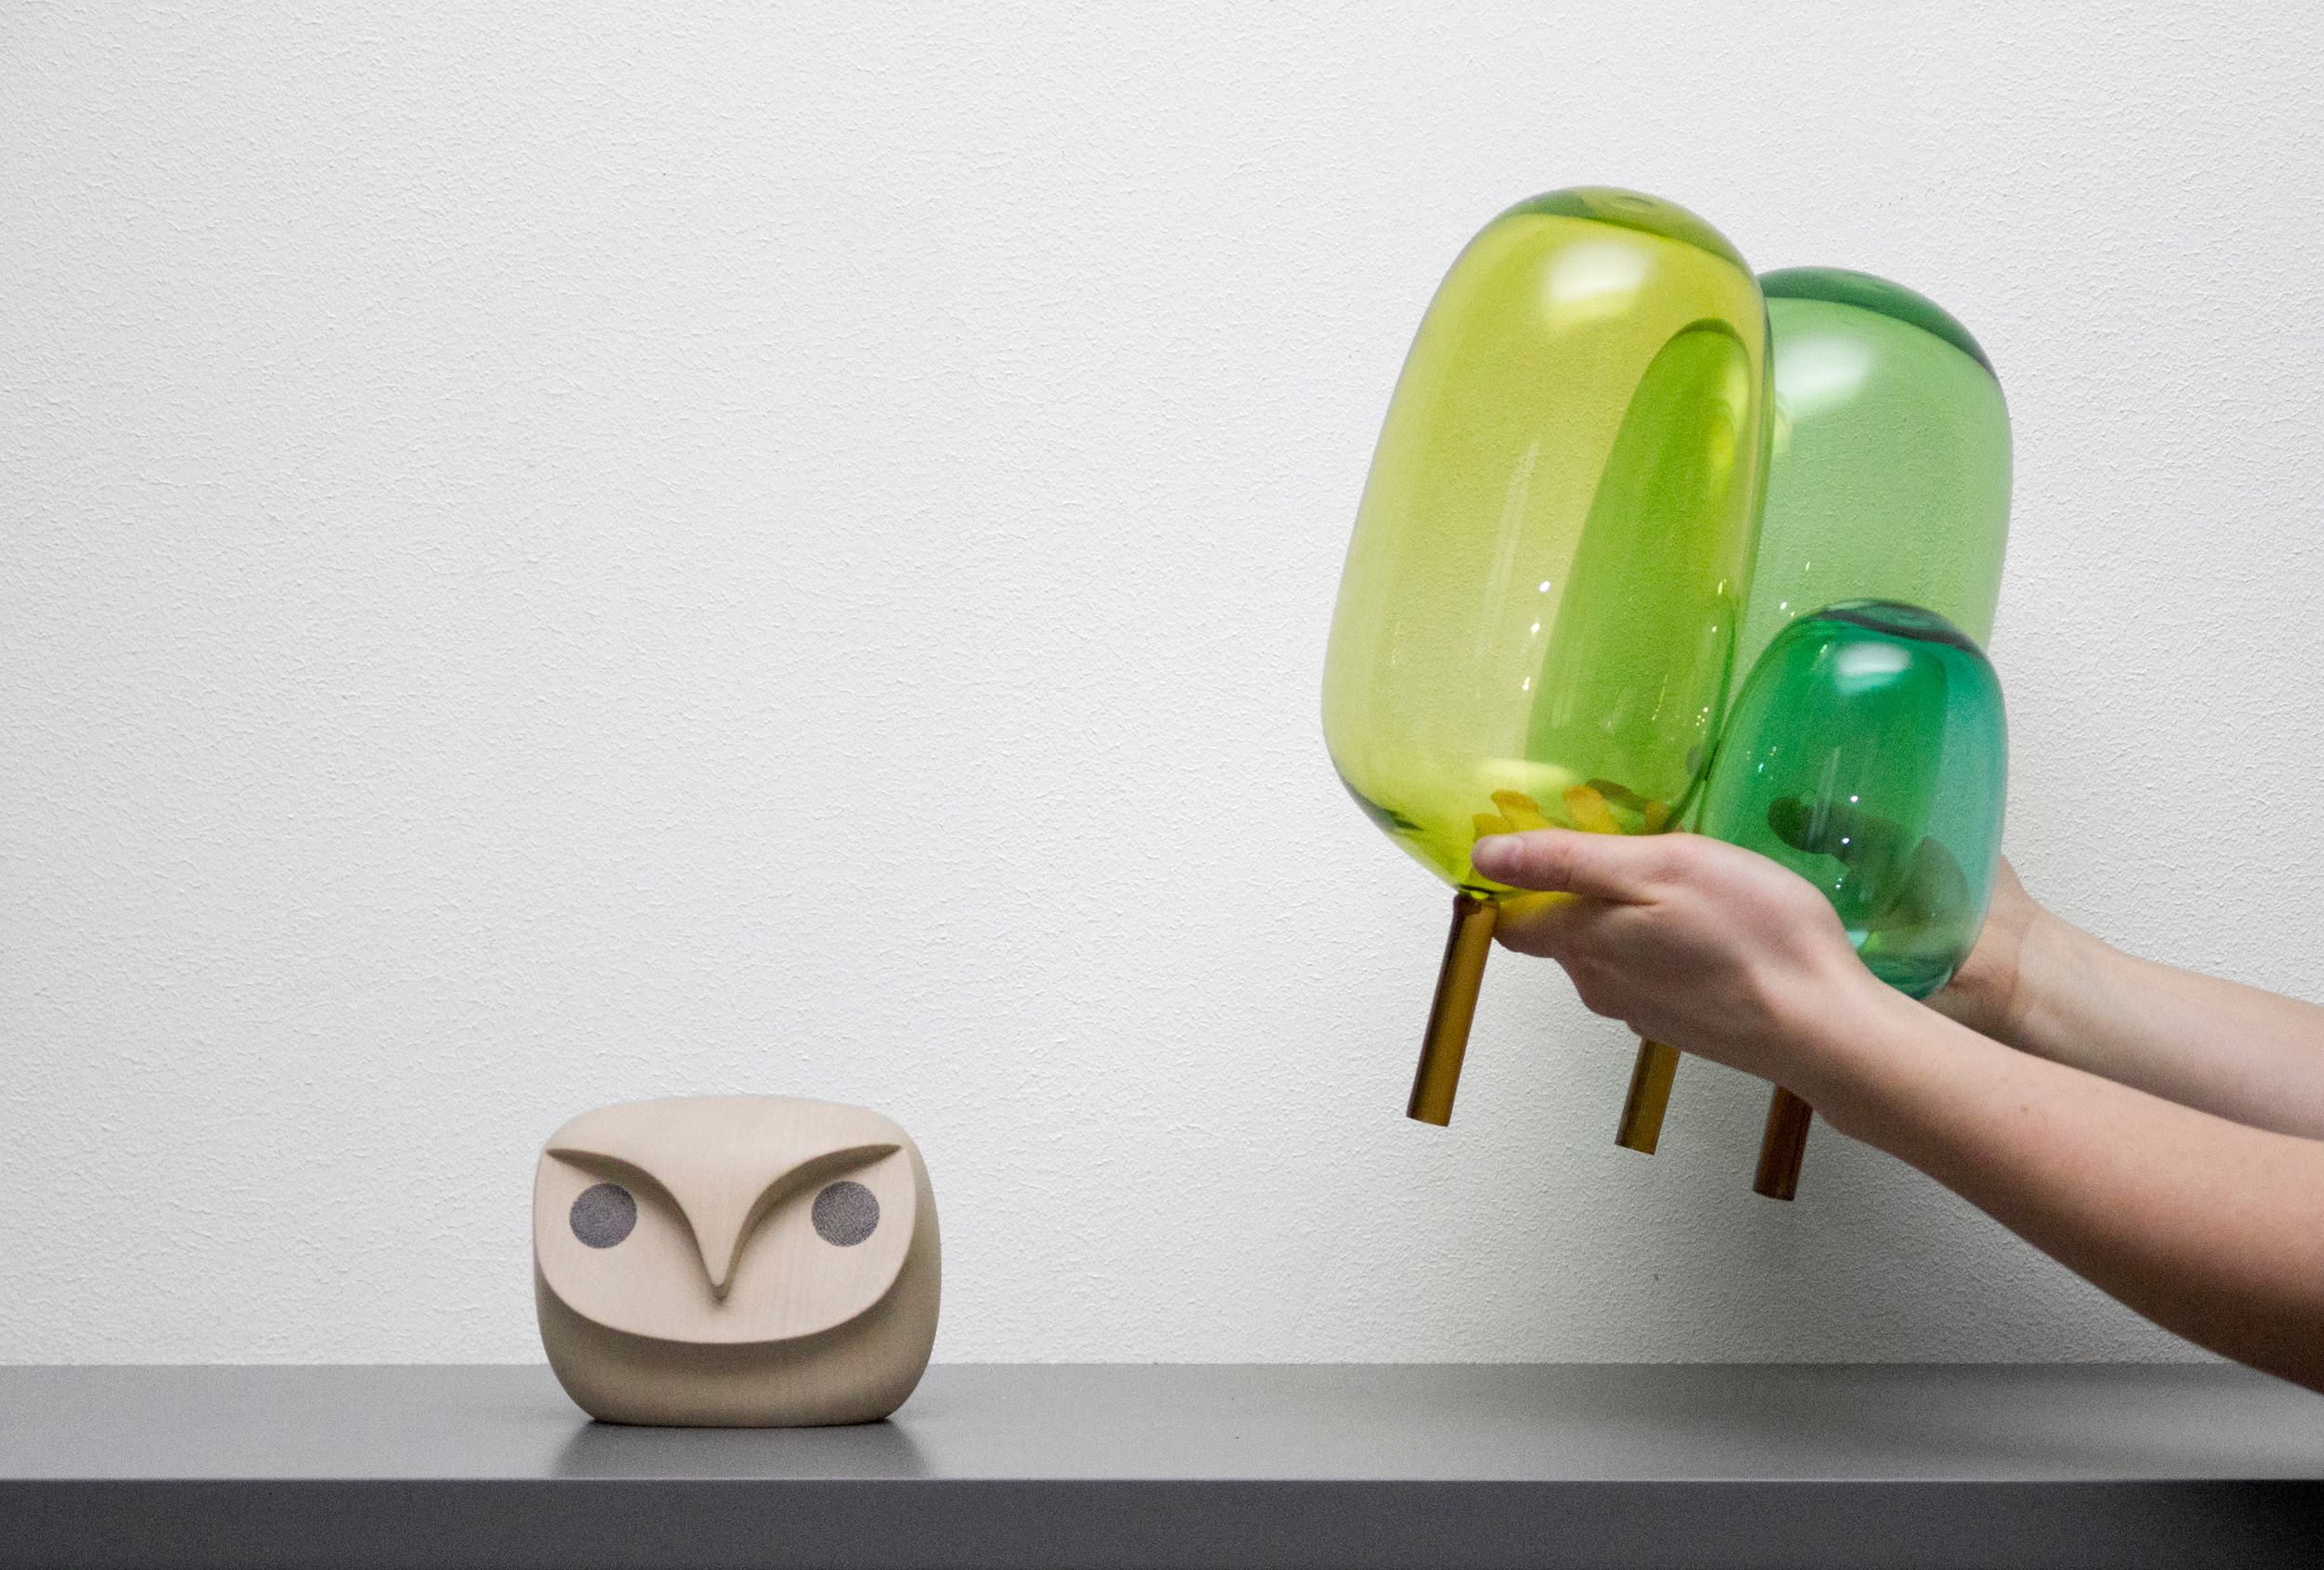 The woods designed by Jonas Stokke, Øystein Austad and Andreas Engesvik, green glass sculptures, mouth blown glass